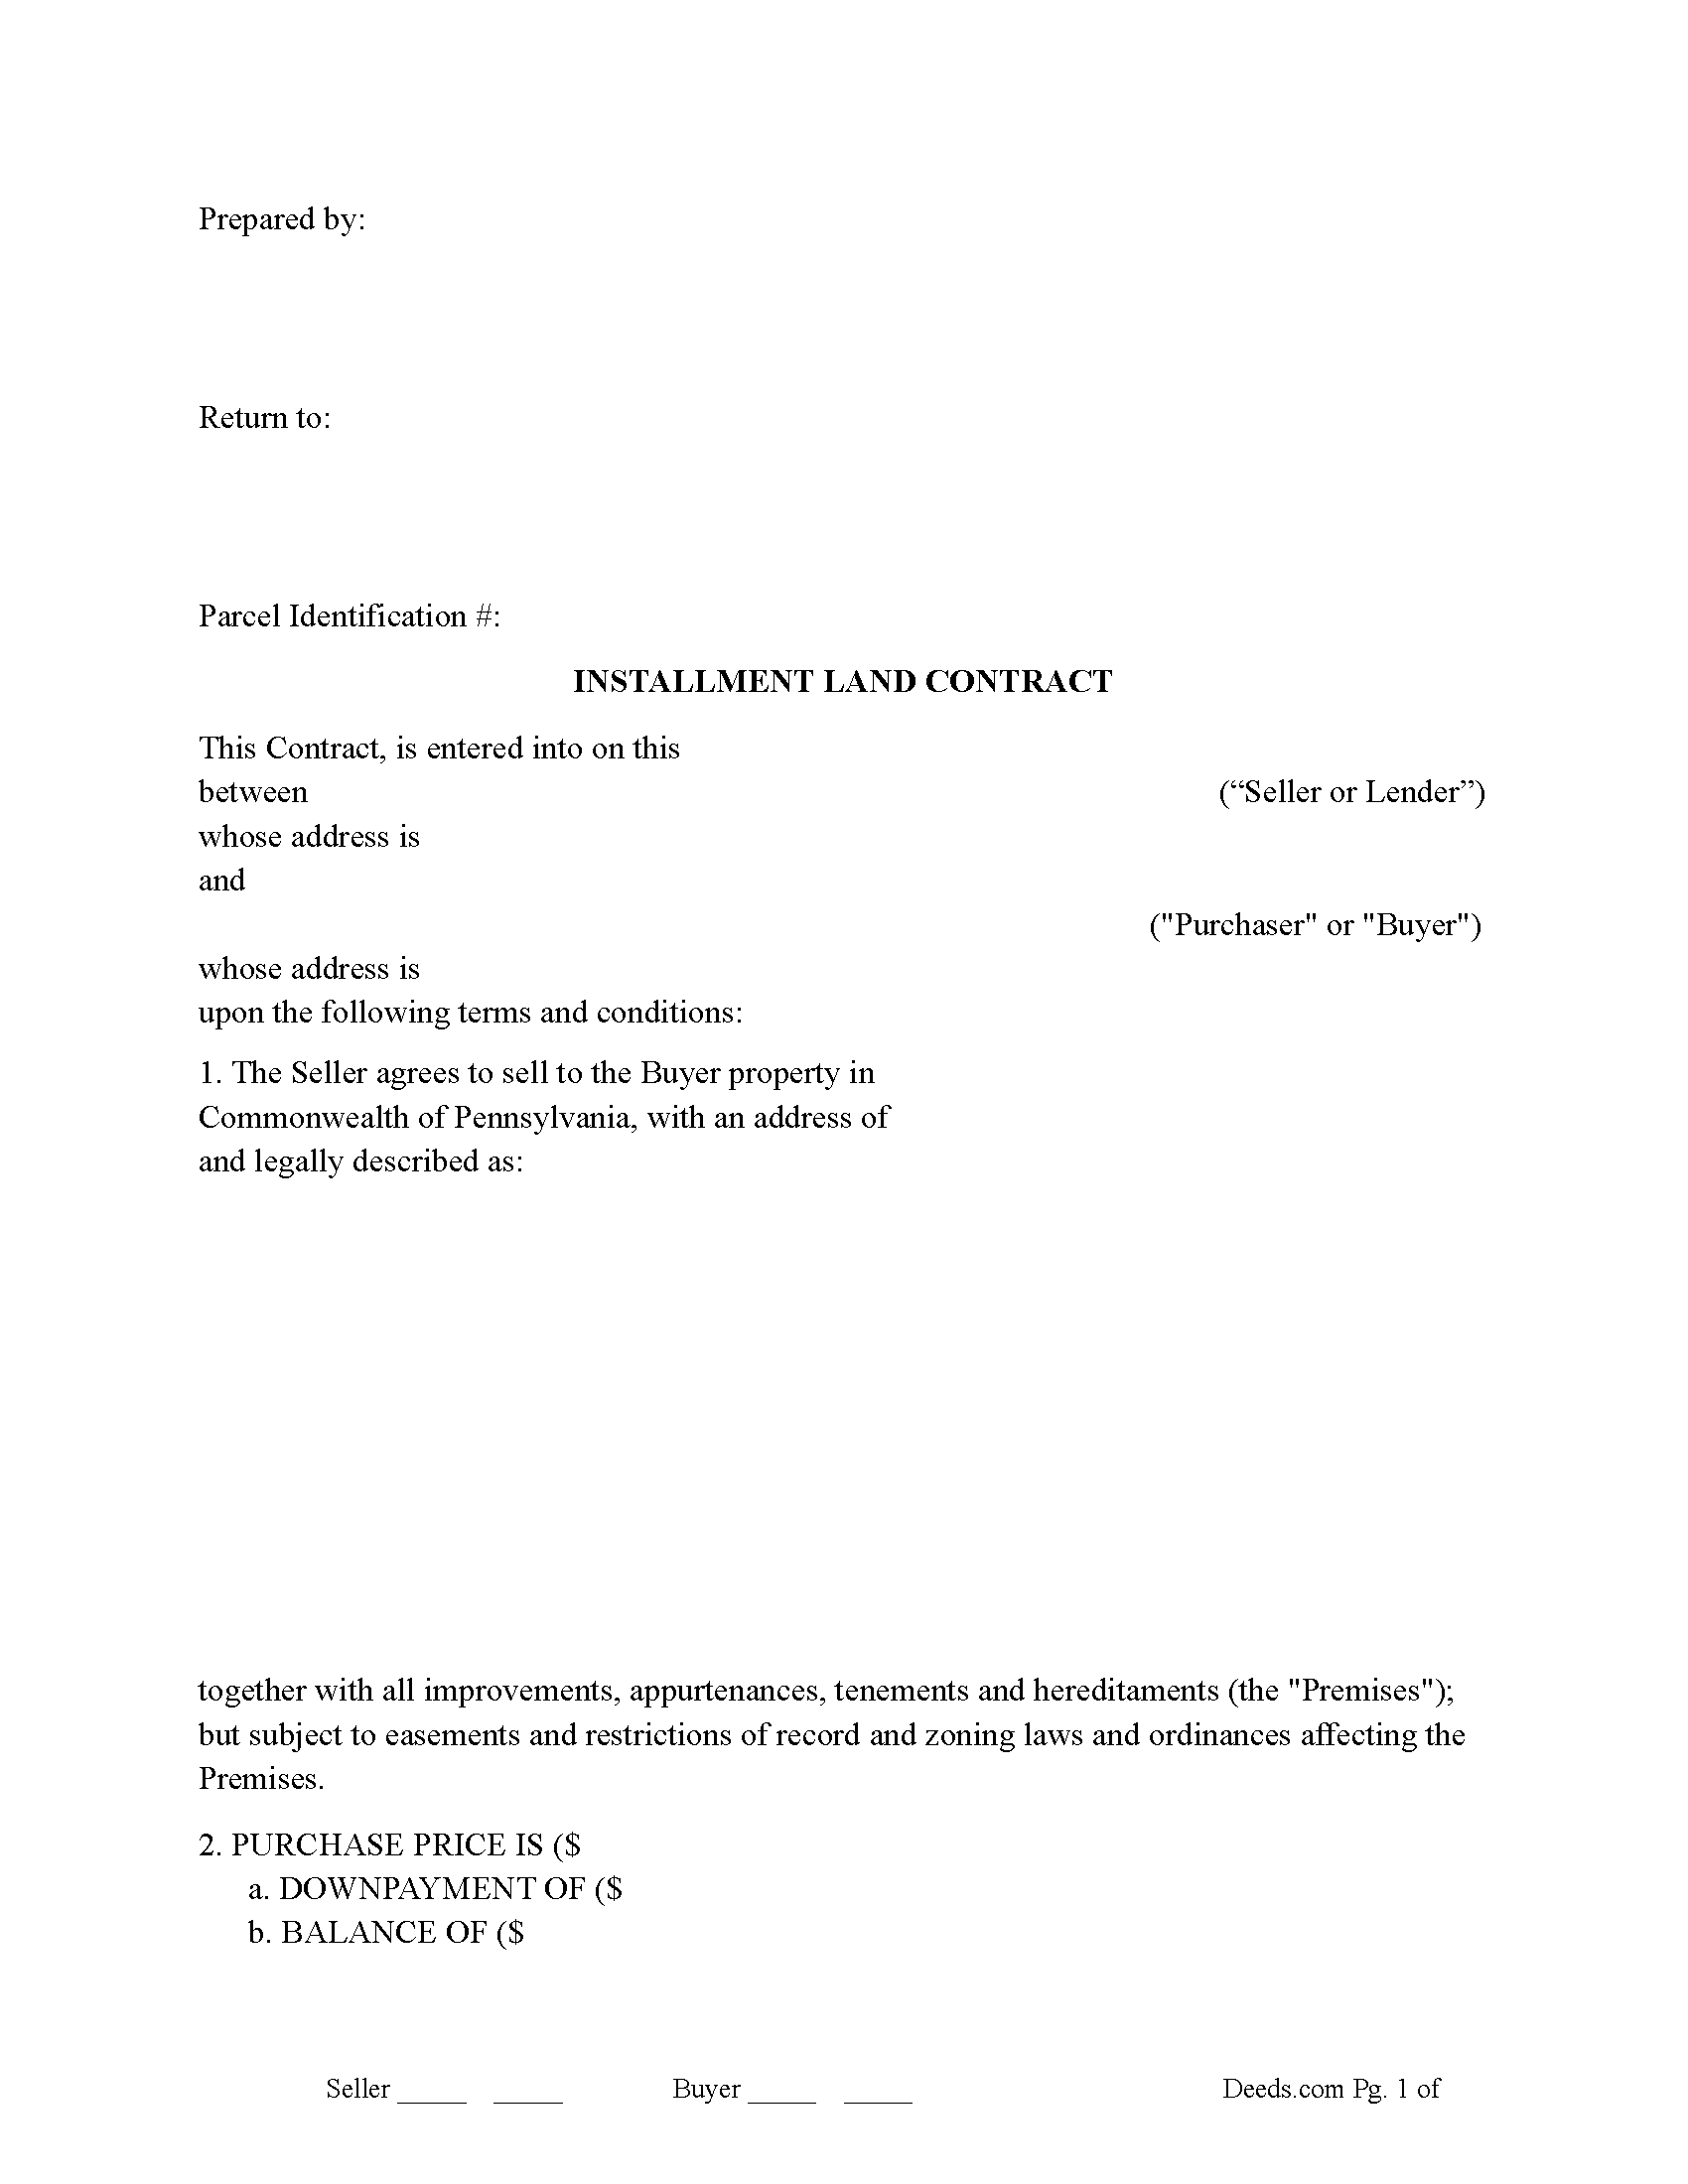 Cameron County Installment Land Contract Form